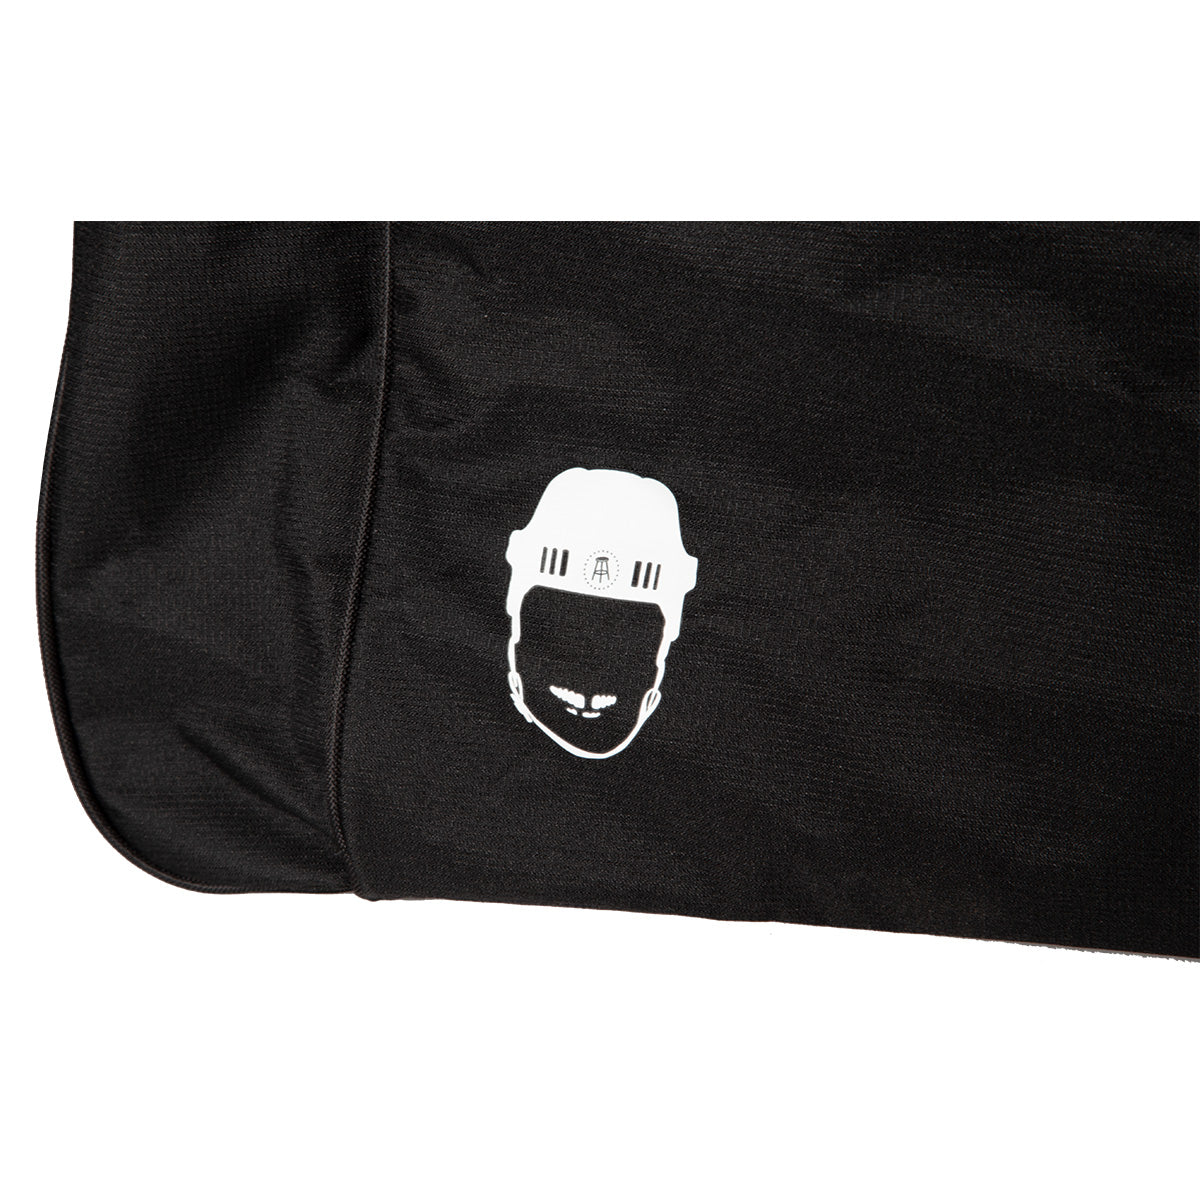 Spittin' Chiclets Not A Big Deal Carry Bag-Accessories-Spittin Chiclets-Barstool Sports